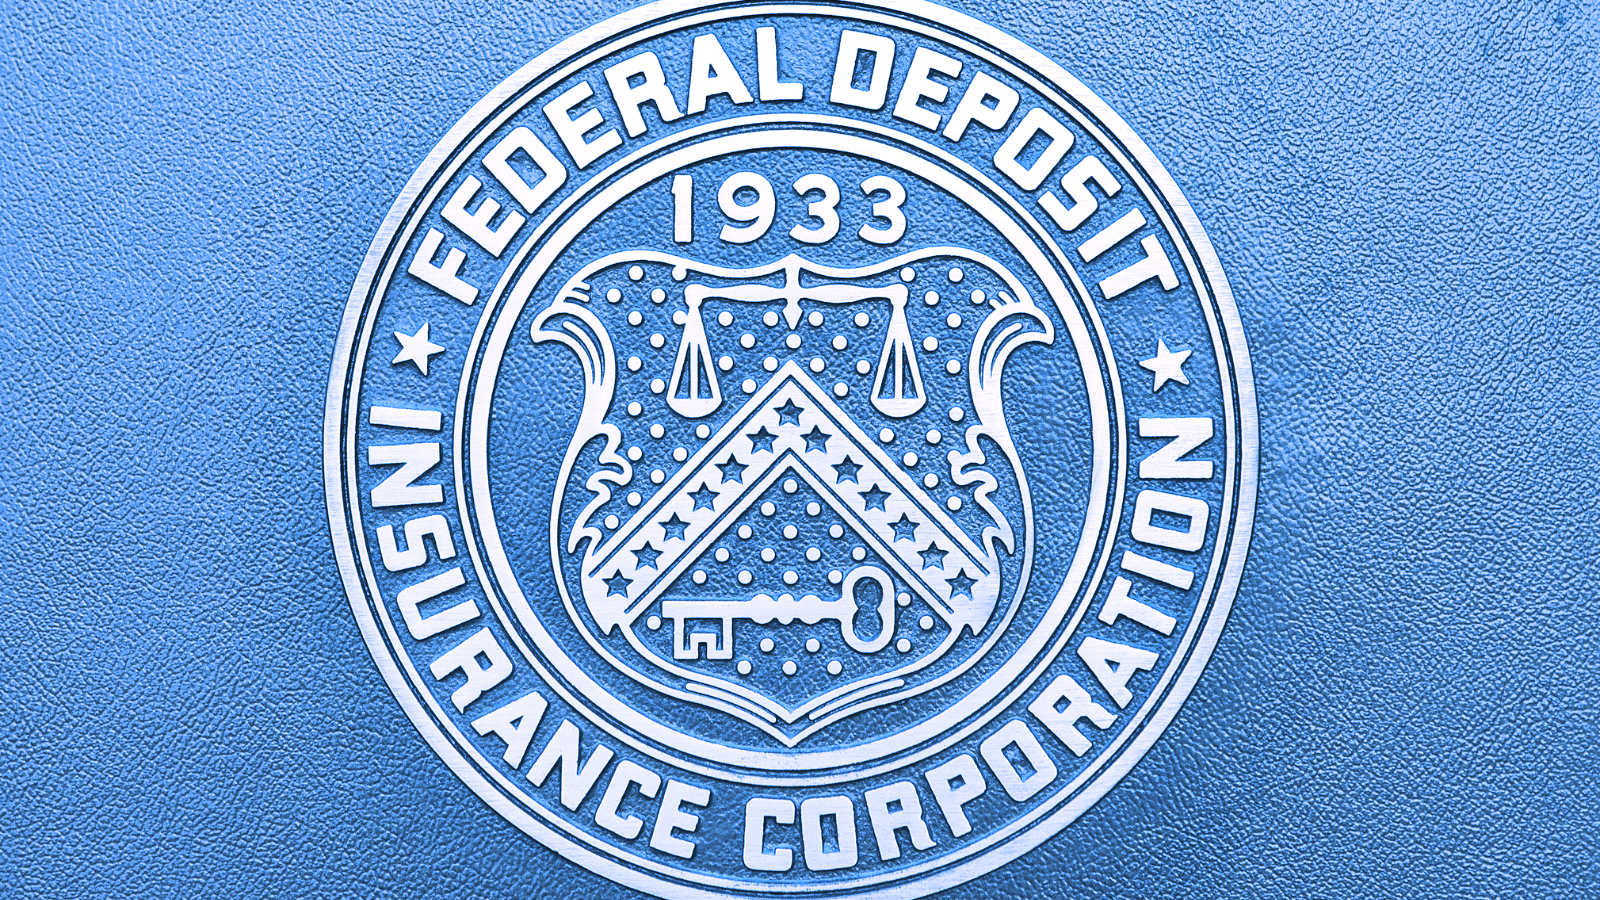 Fed, FDIC Order Voyager to Stop 'False and Misleading' Insurance Claims